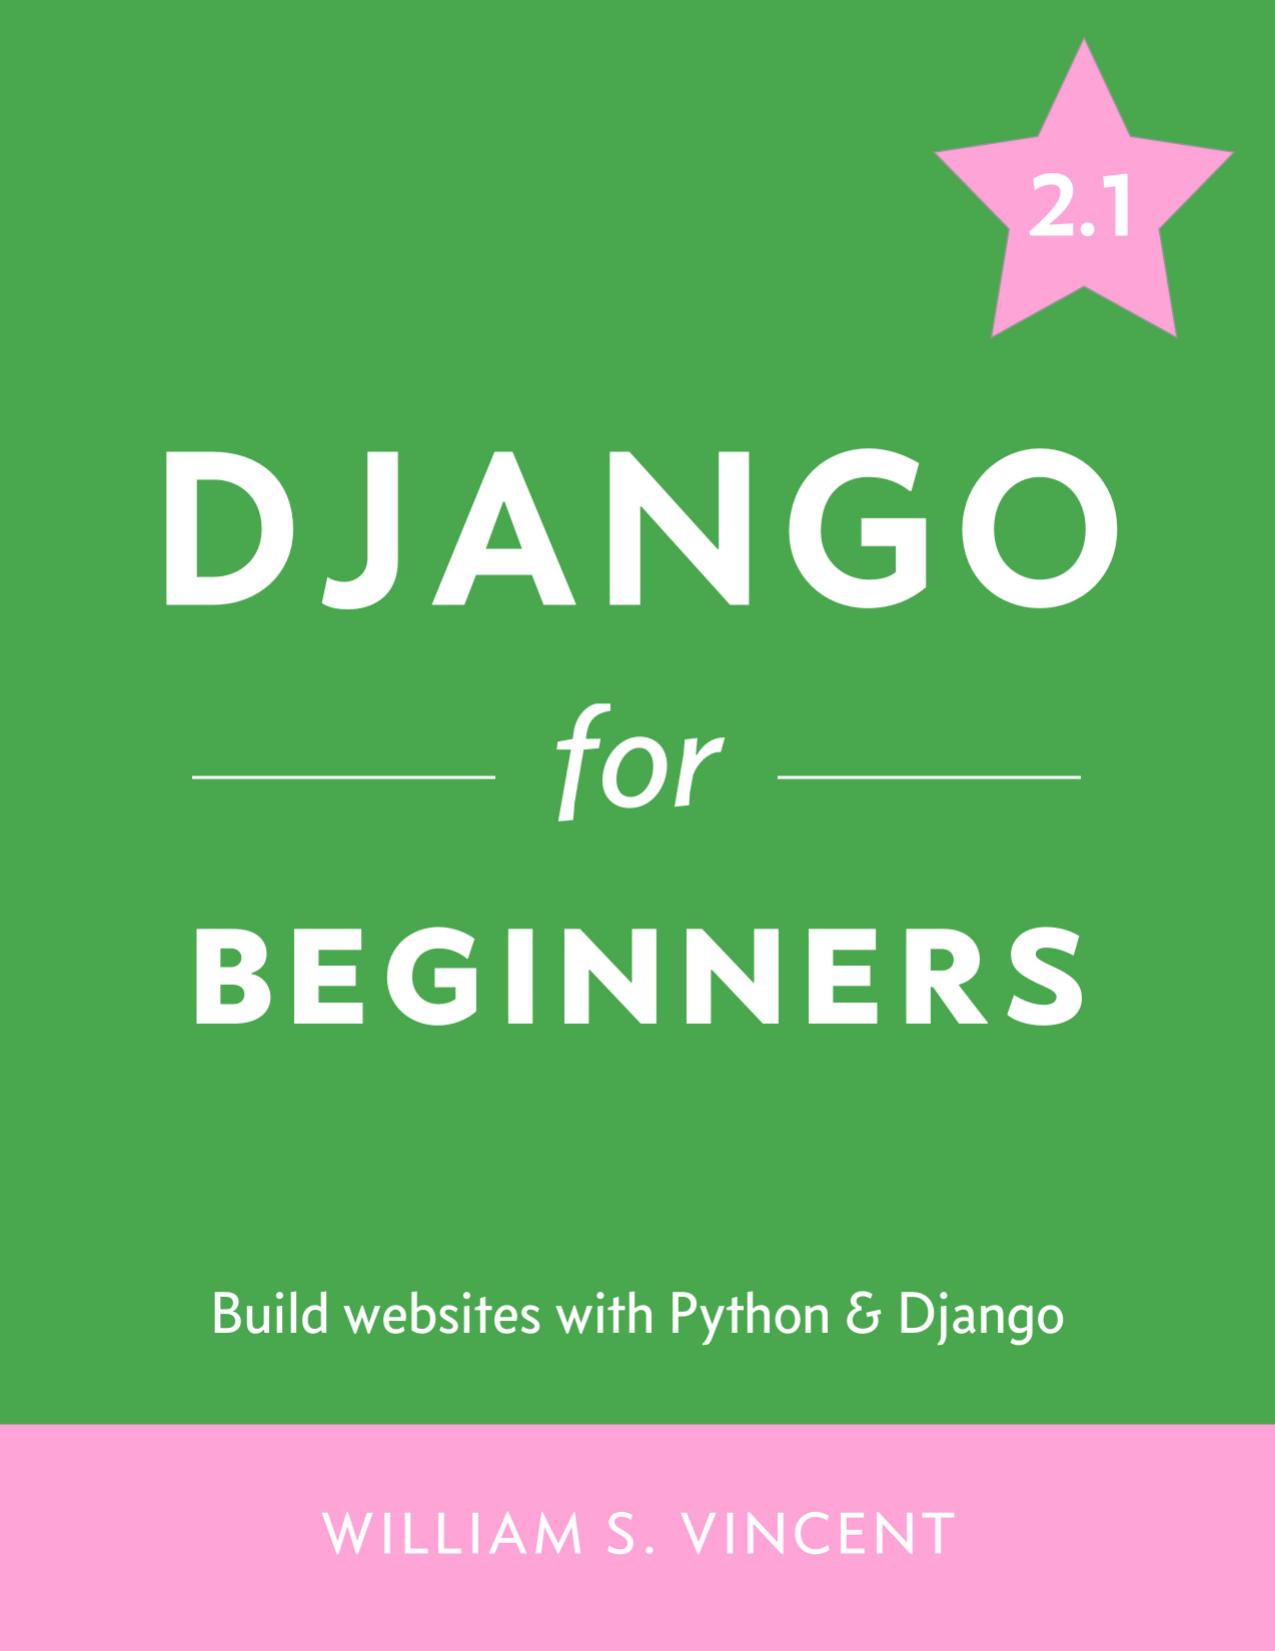 Django for Beginners by William S. Vincent